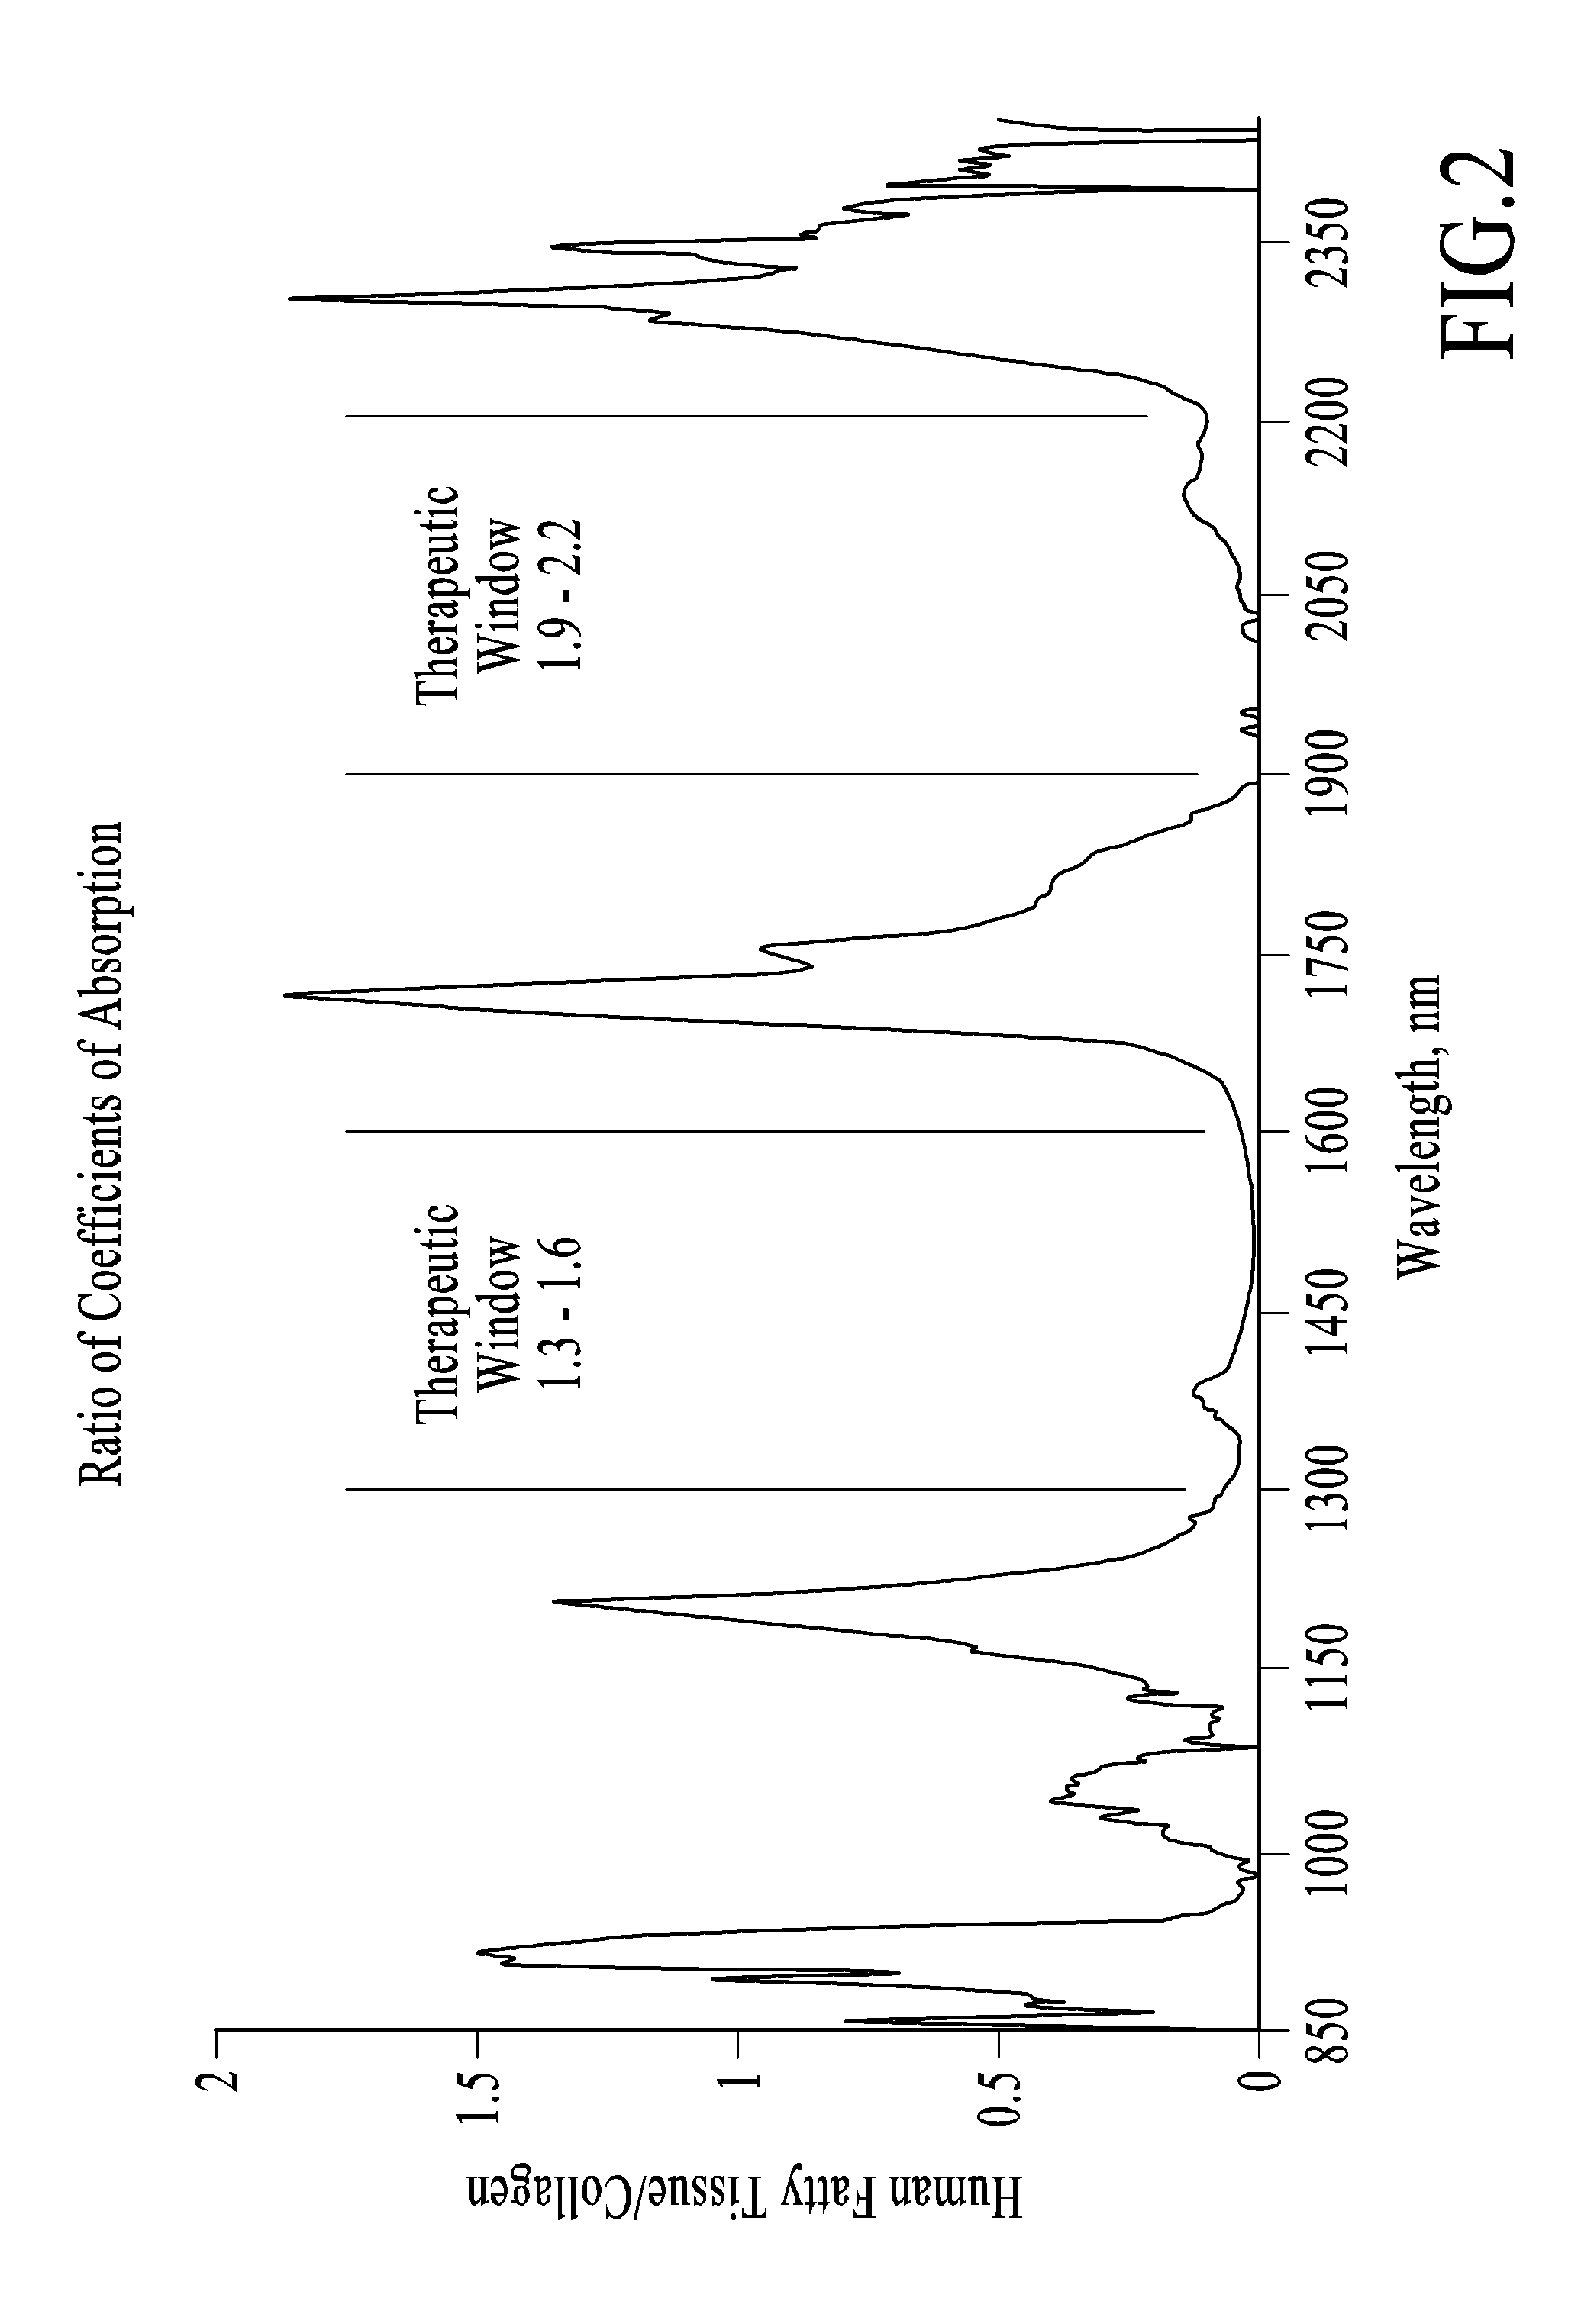 Thermally mediated tissue molding